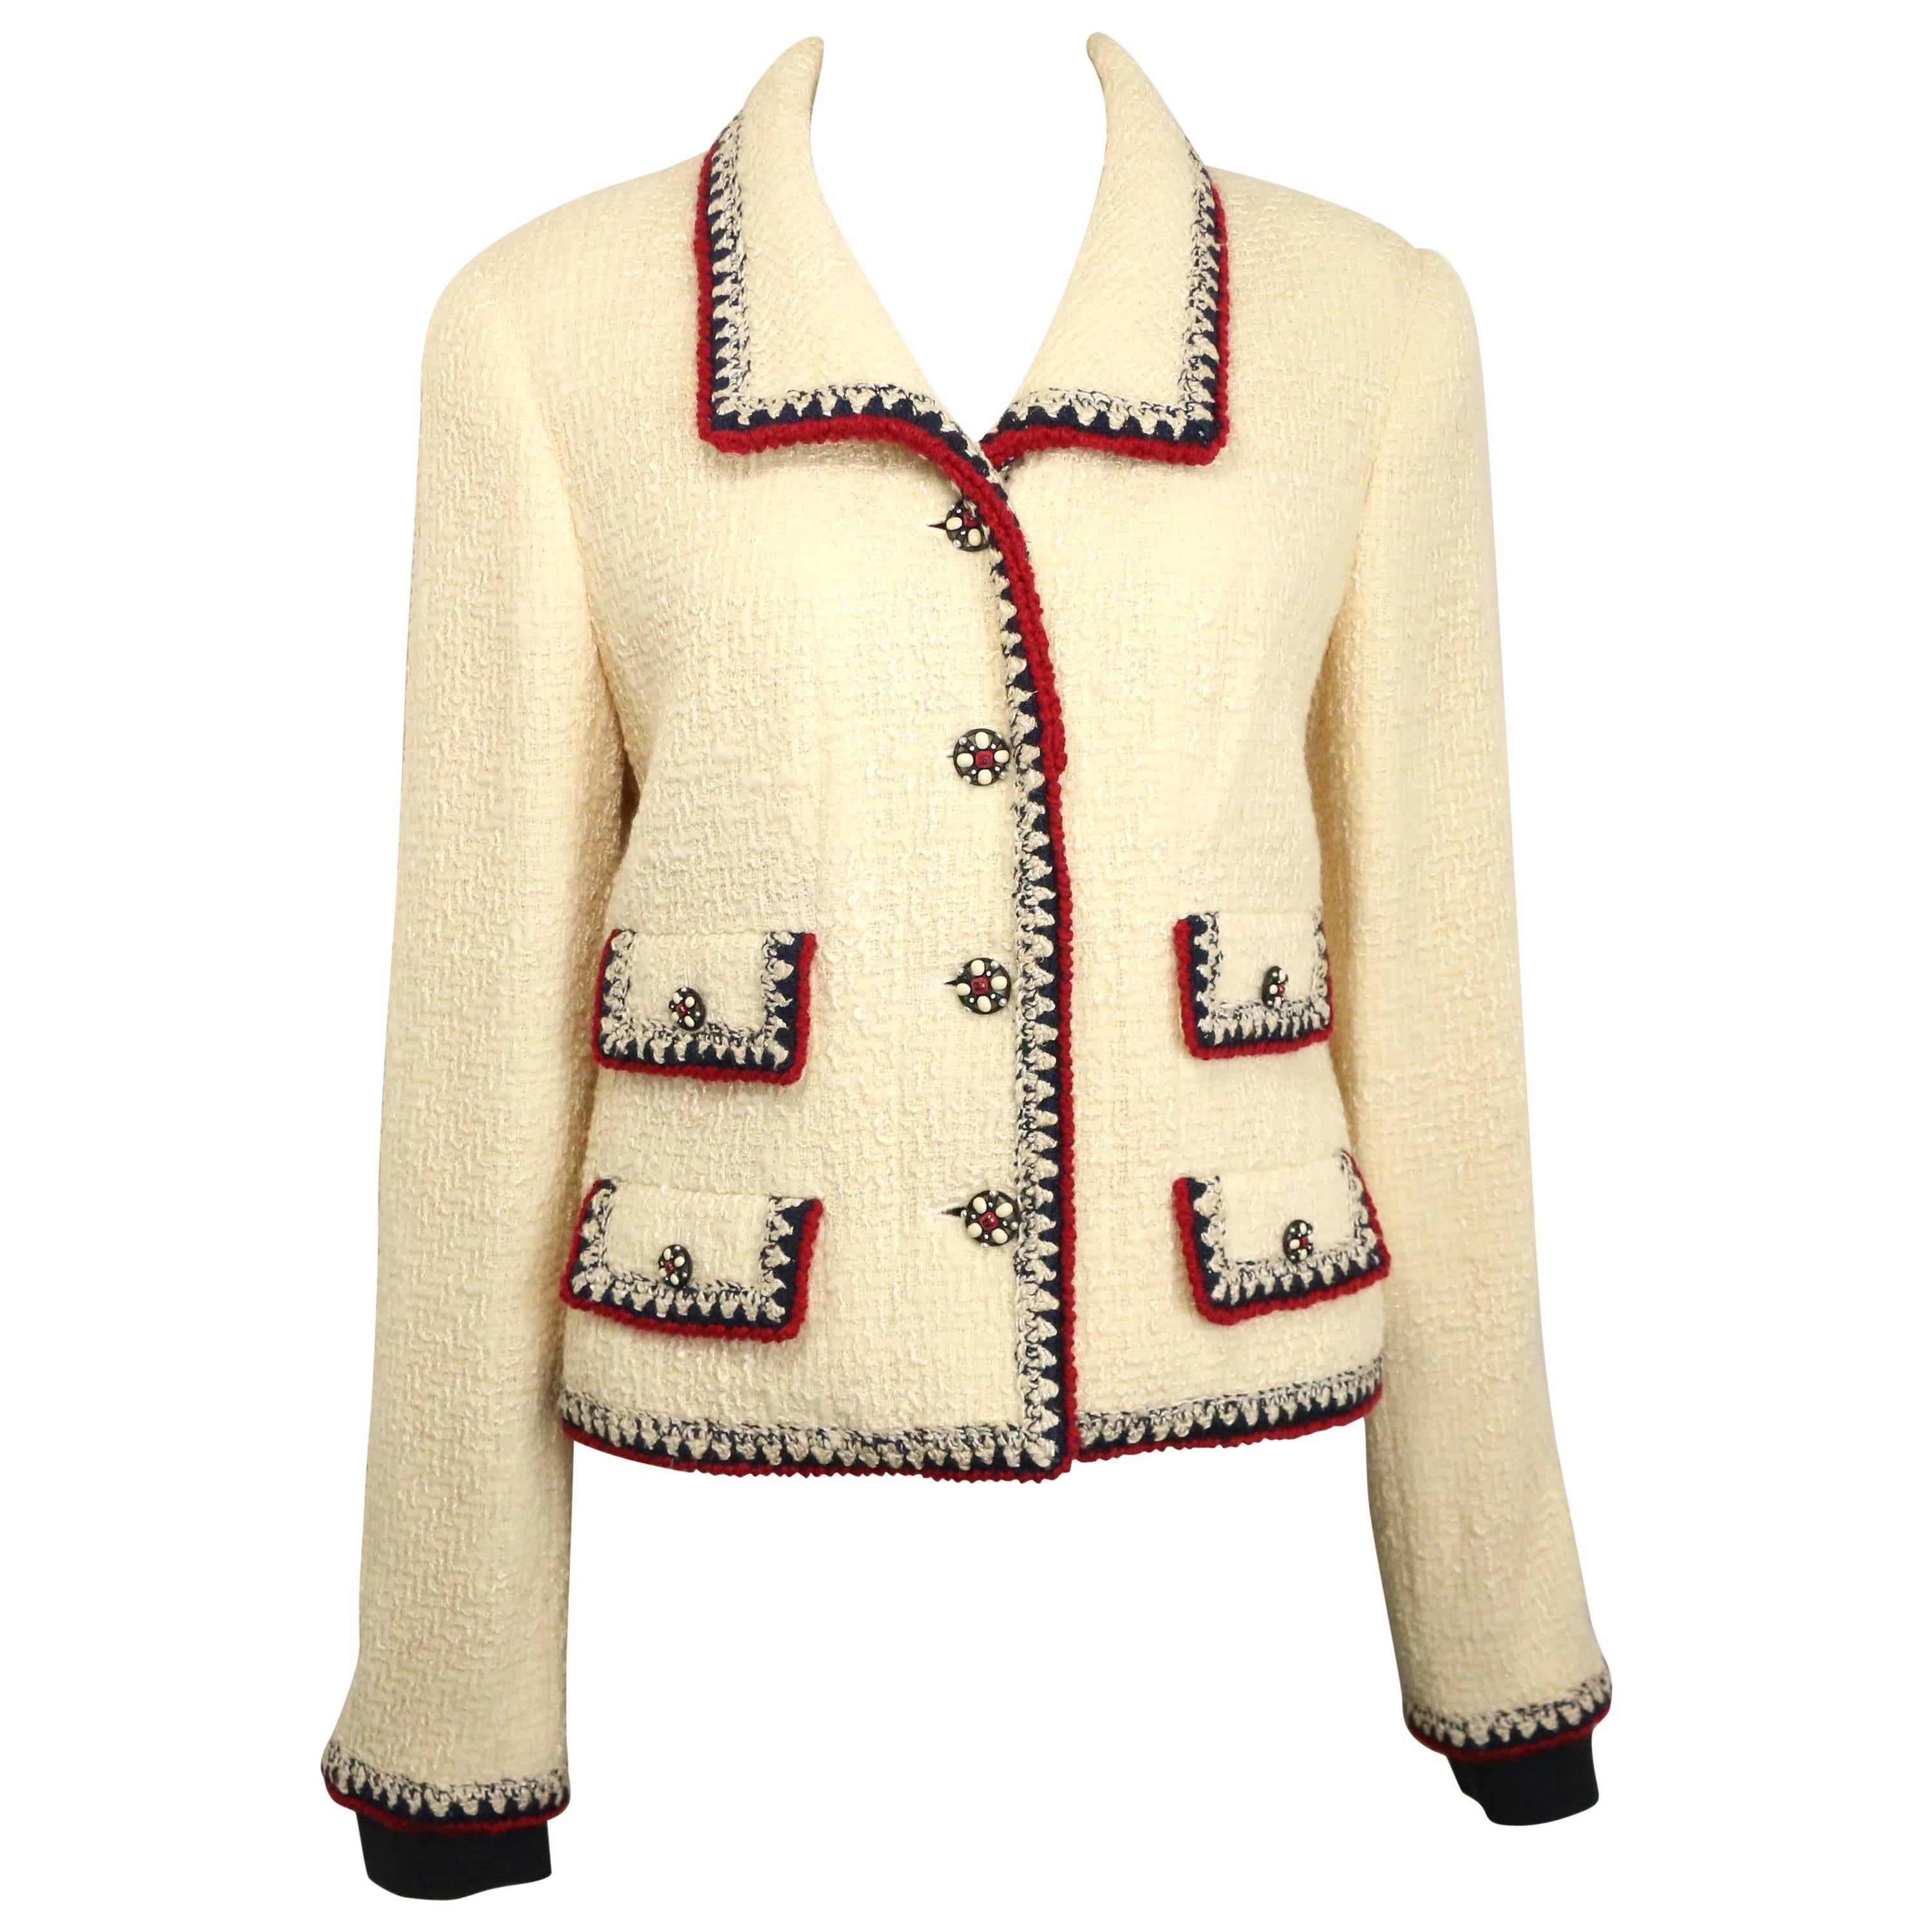 Fall 2006 Chanel White Wool Tweed with Black and Red Piping Trim Jacket